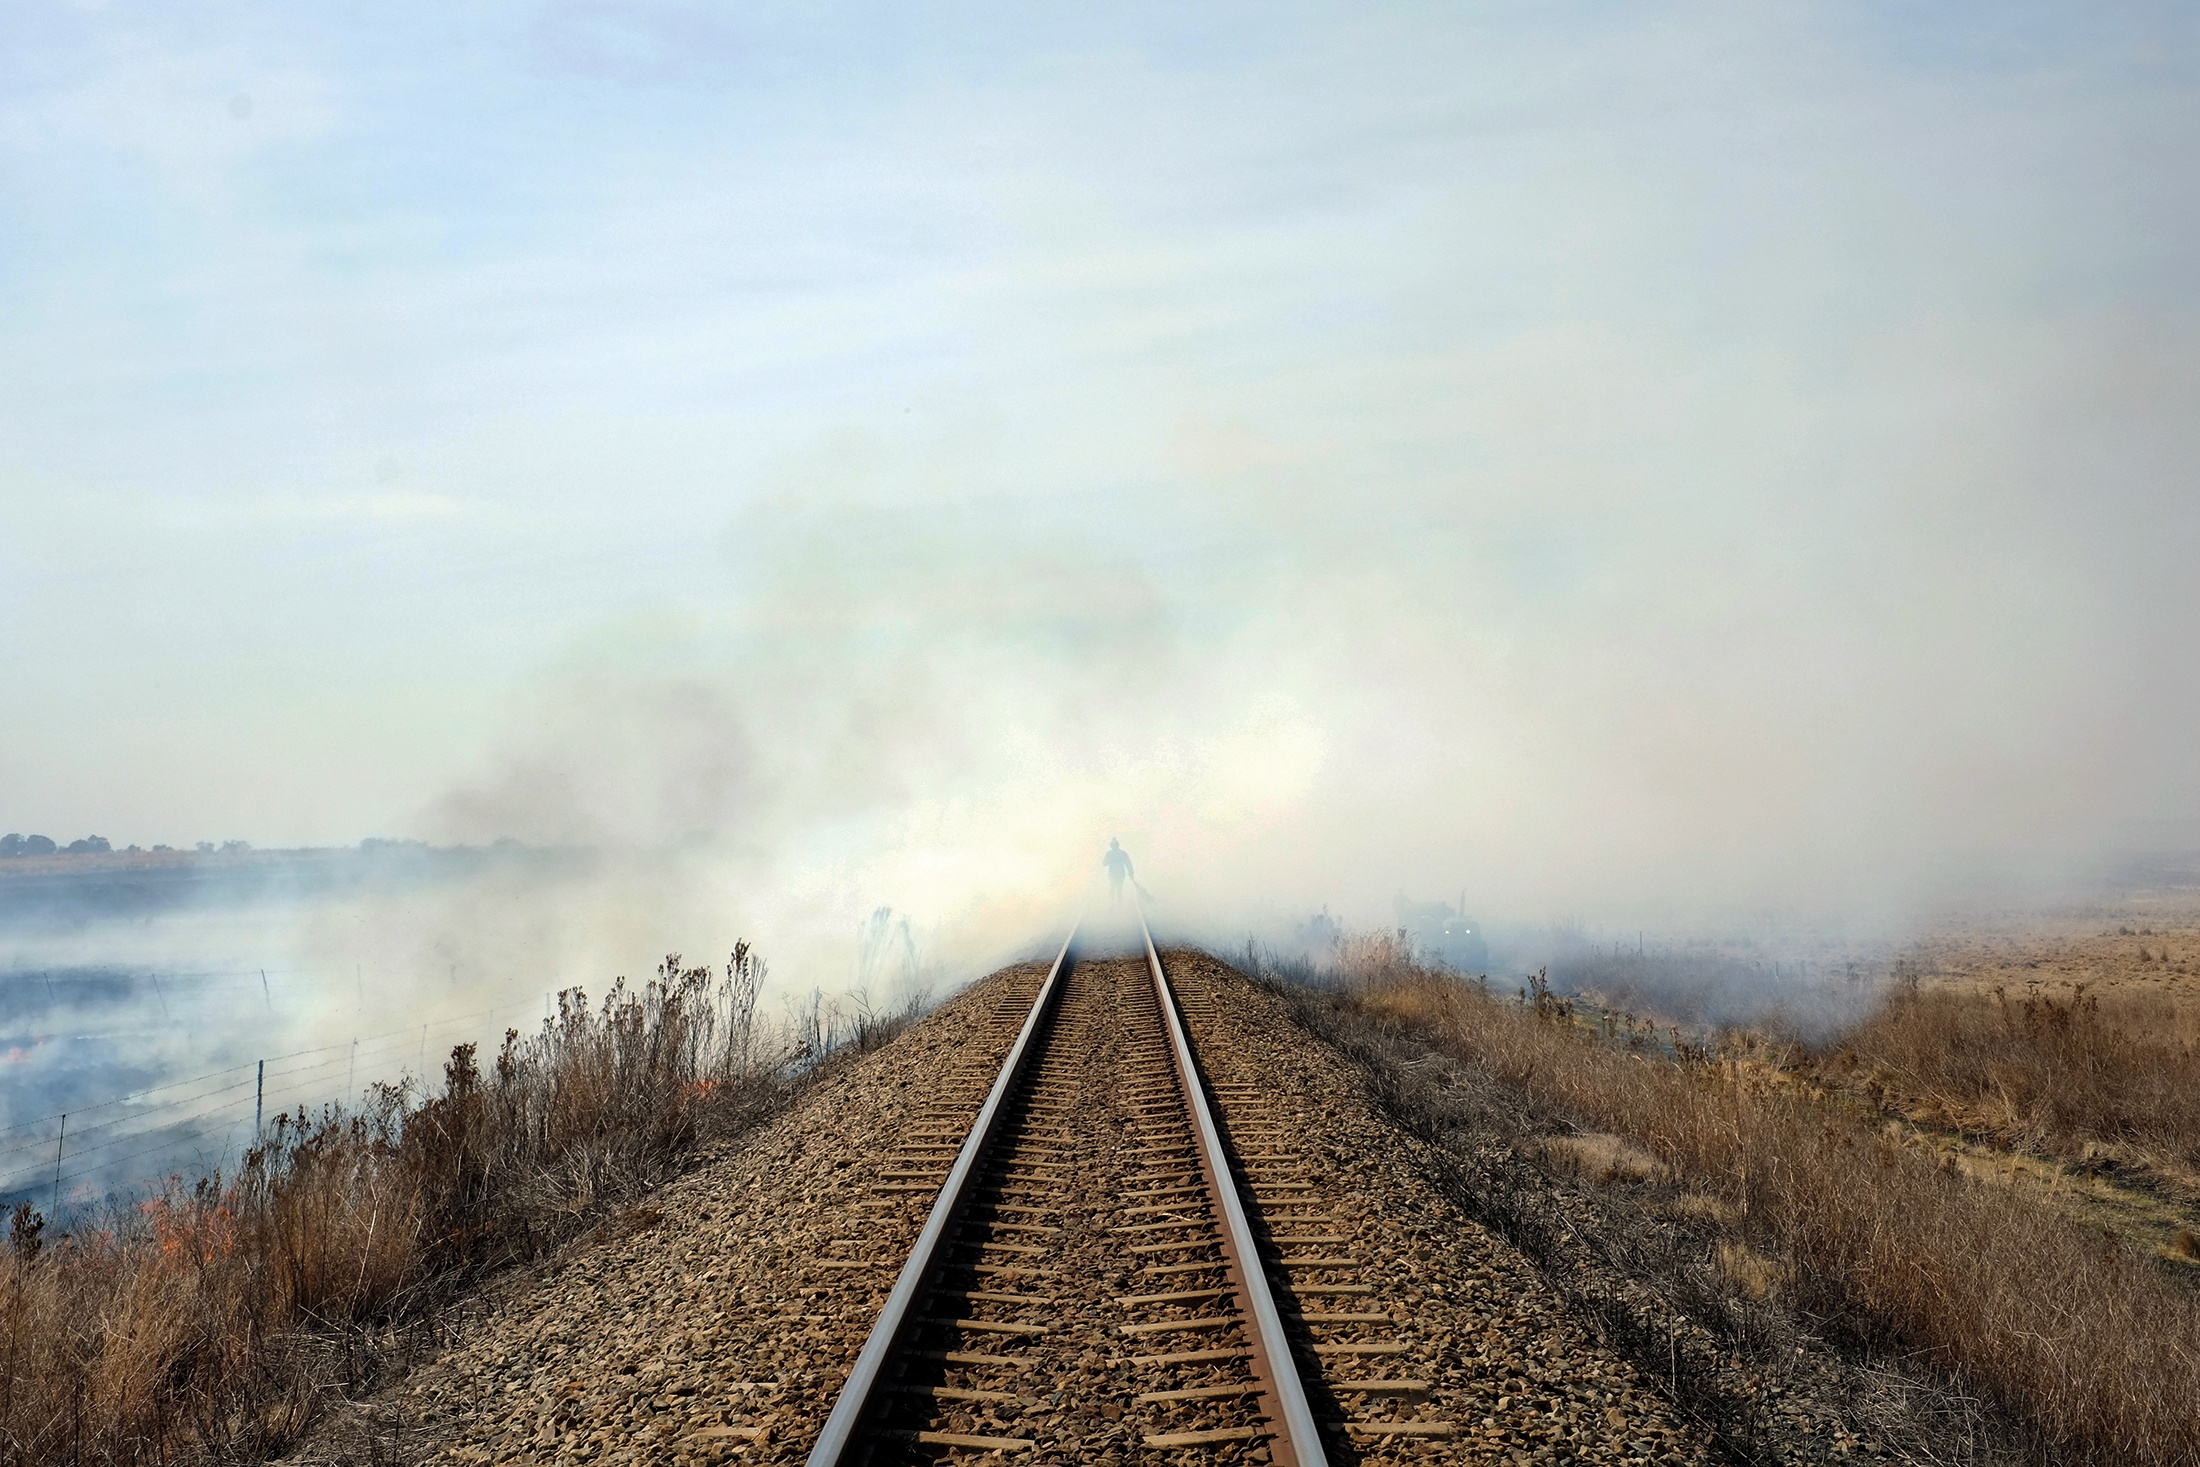 Photograph from Roger Palmer’s photo-book ‘SPOOR,’ launched on A4’s ground floor. In the middle, a railway runs off into the horizon, covered in smoke from a burning field on the lefthand side. A human figure is partially visible in the smoke.
